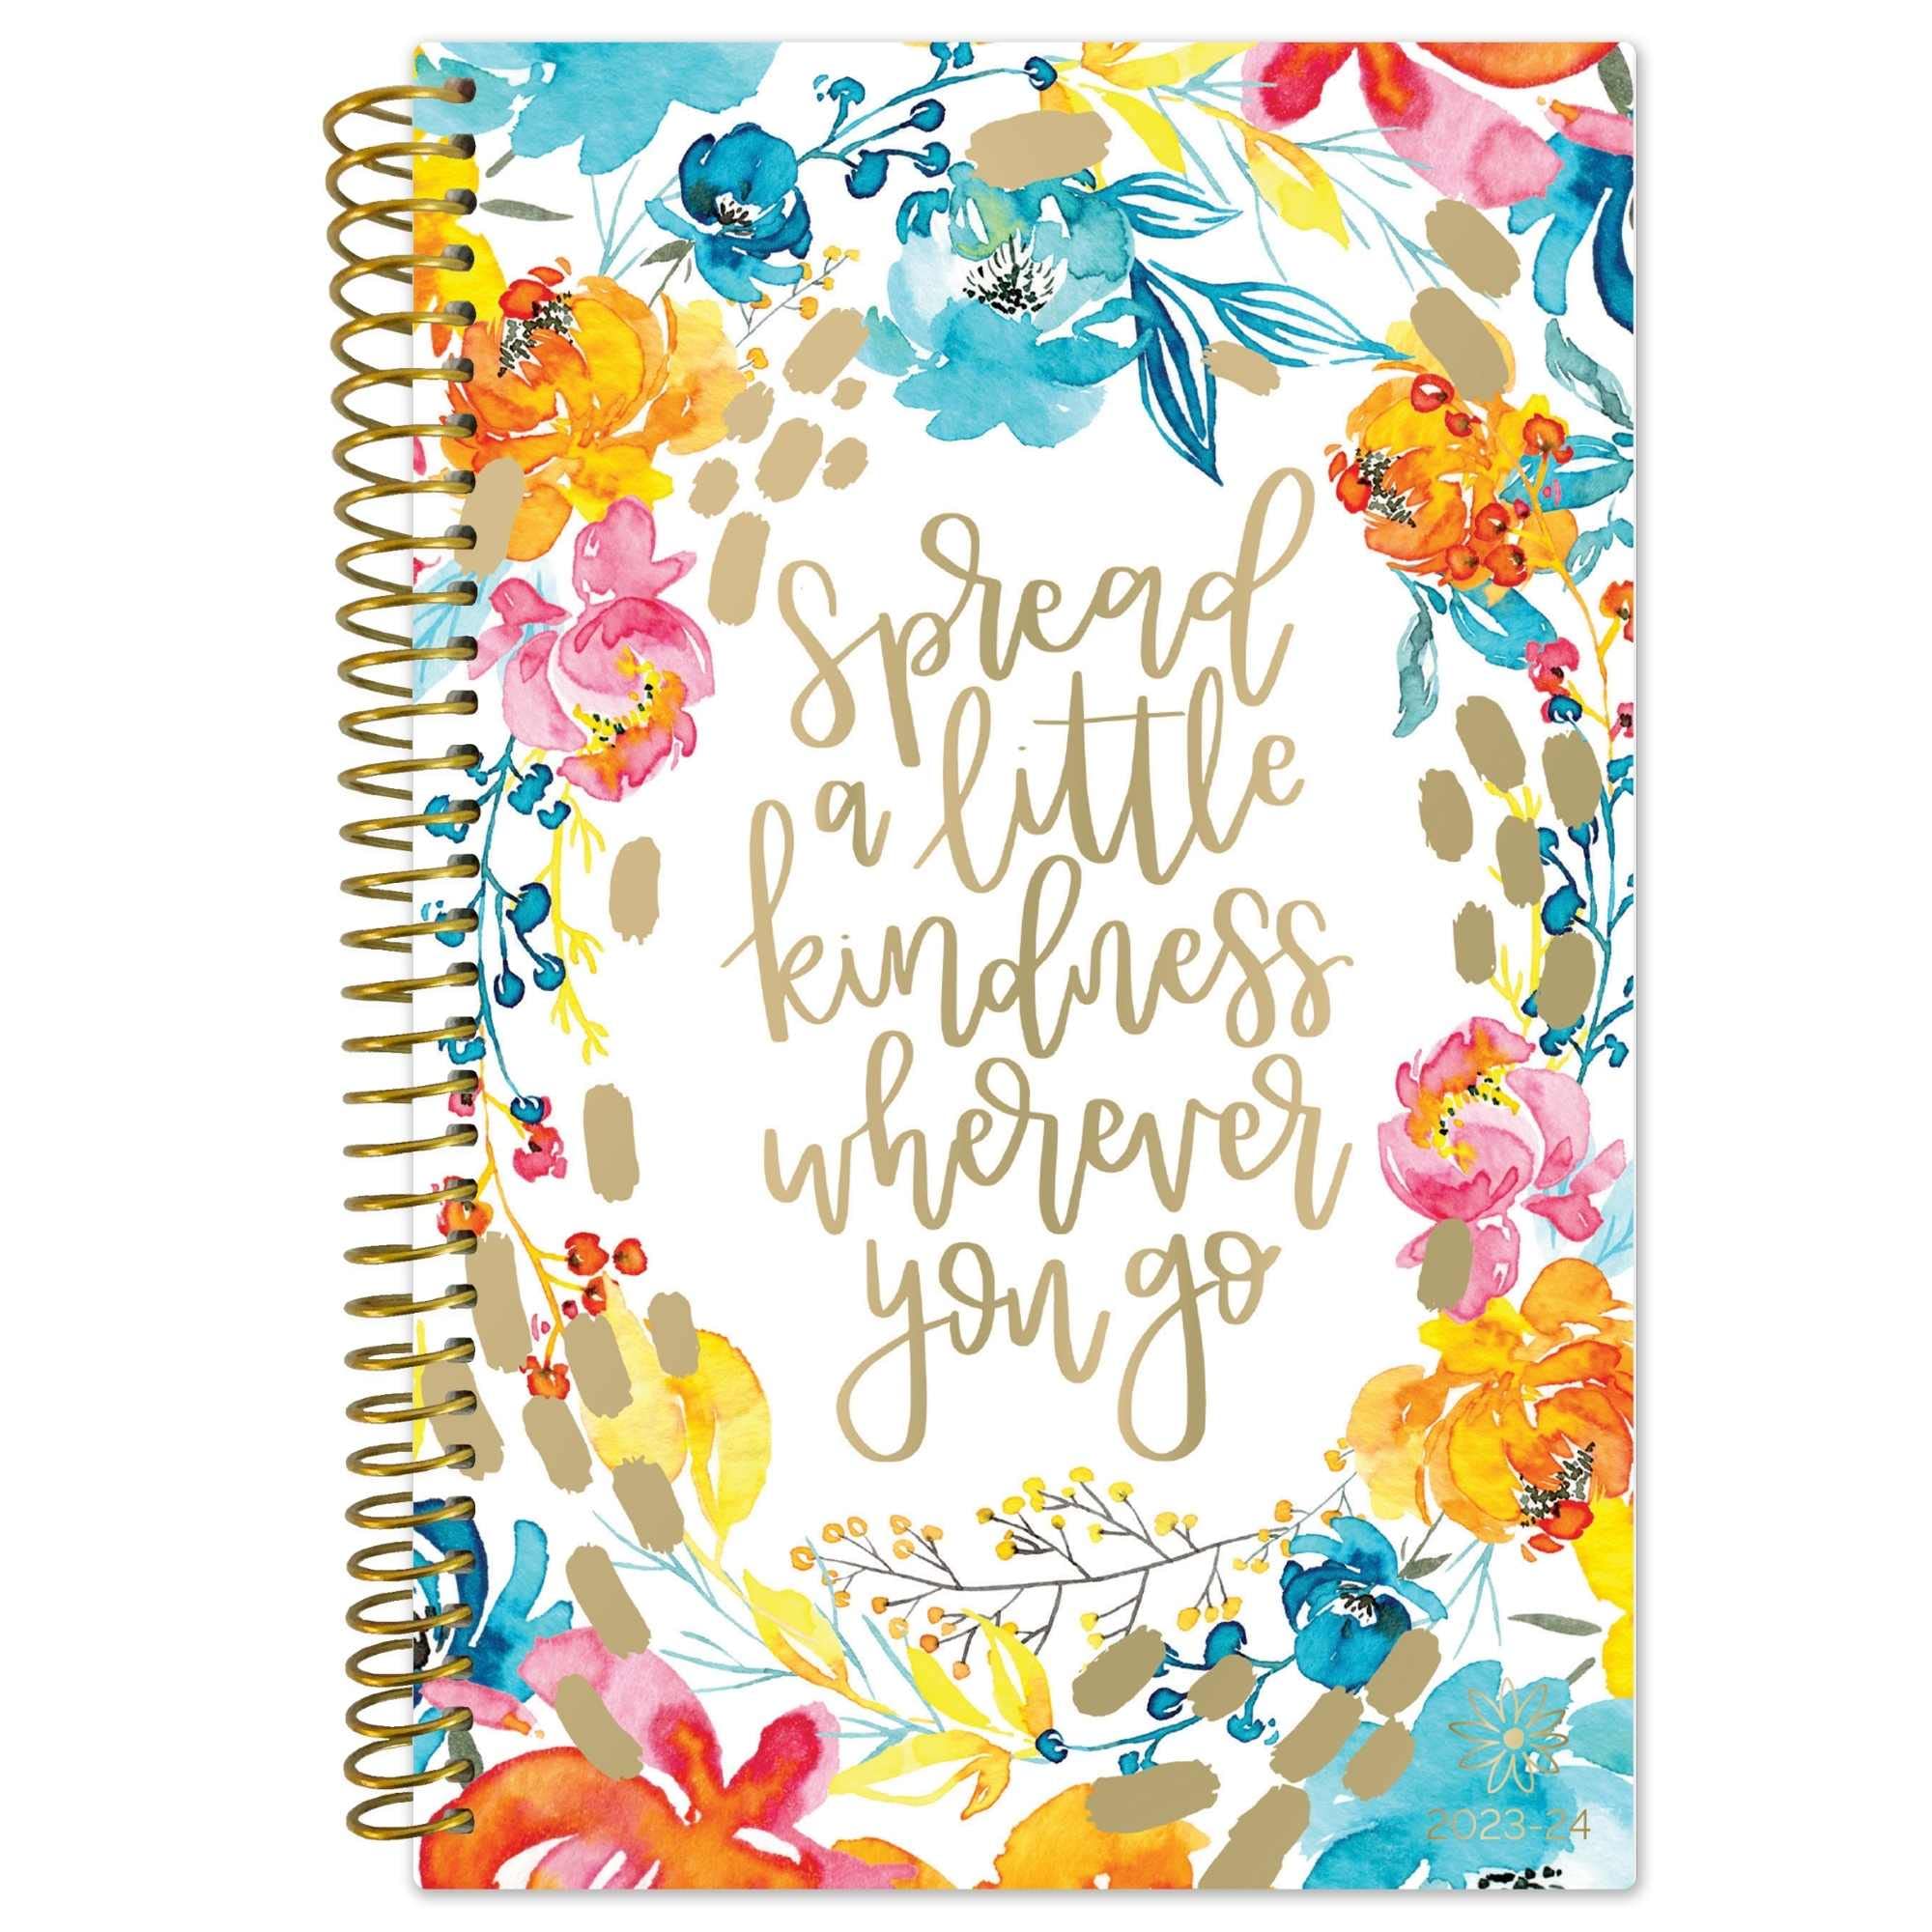 bloom daily planners 2023-2024 Pocket Planner - 4” x 6” - (July 2023 - July 2024) - MINI Weekly/Monthly Agenda Organizer & Calendar Book - Spread Kindness